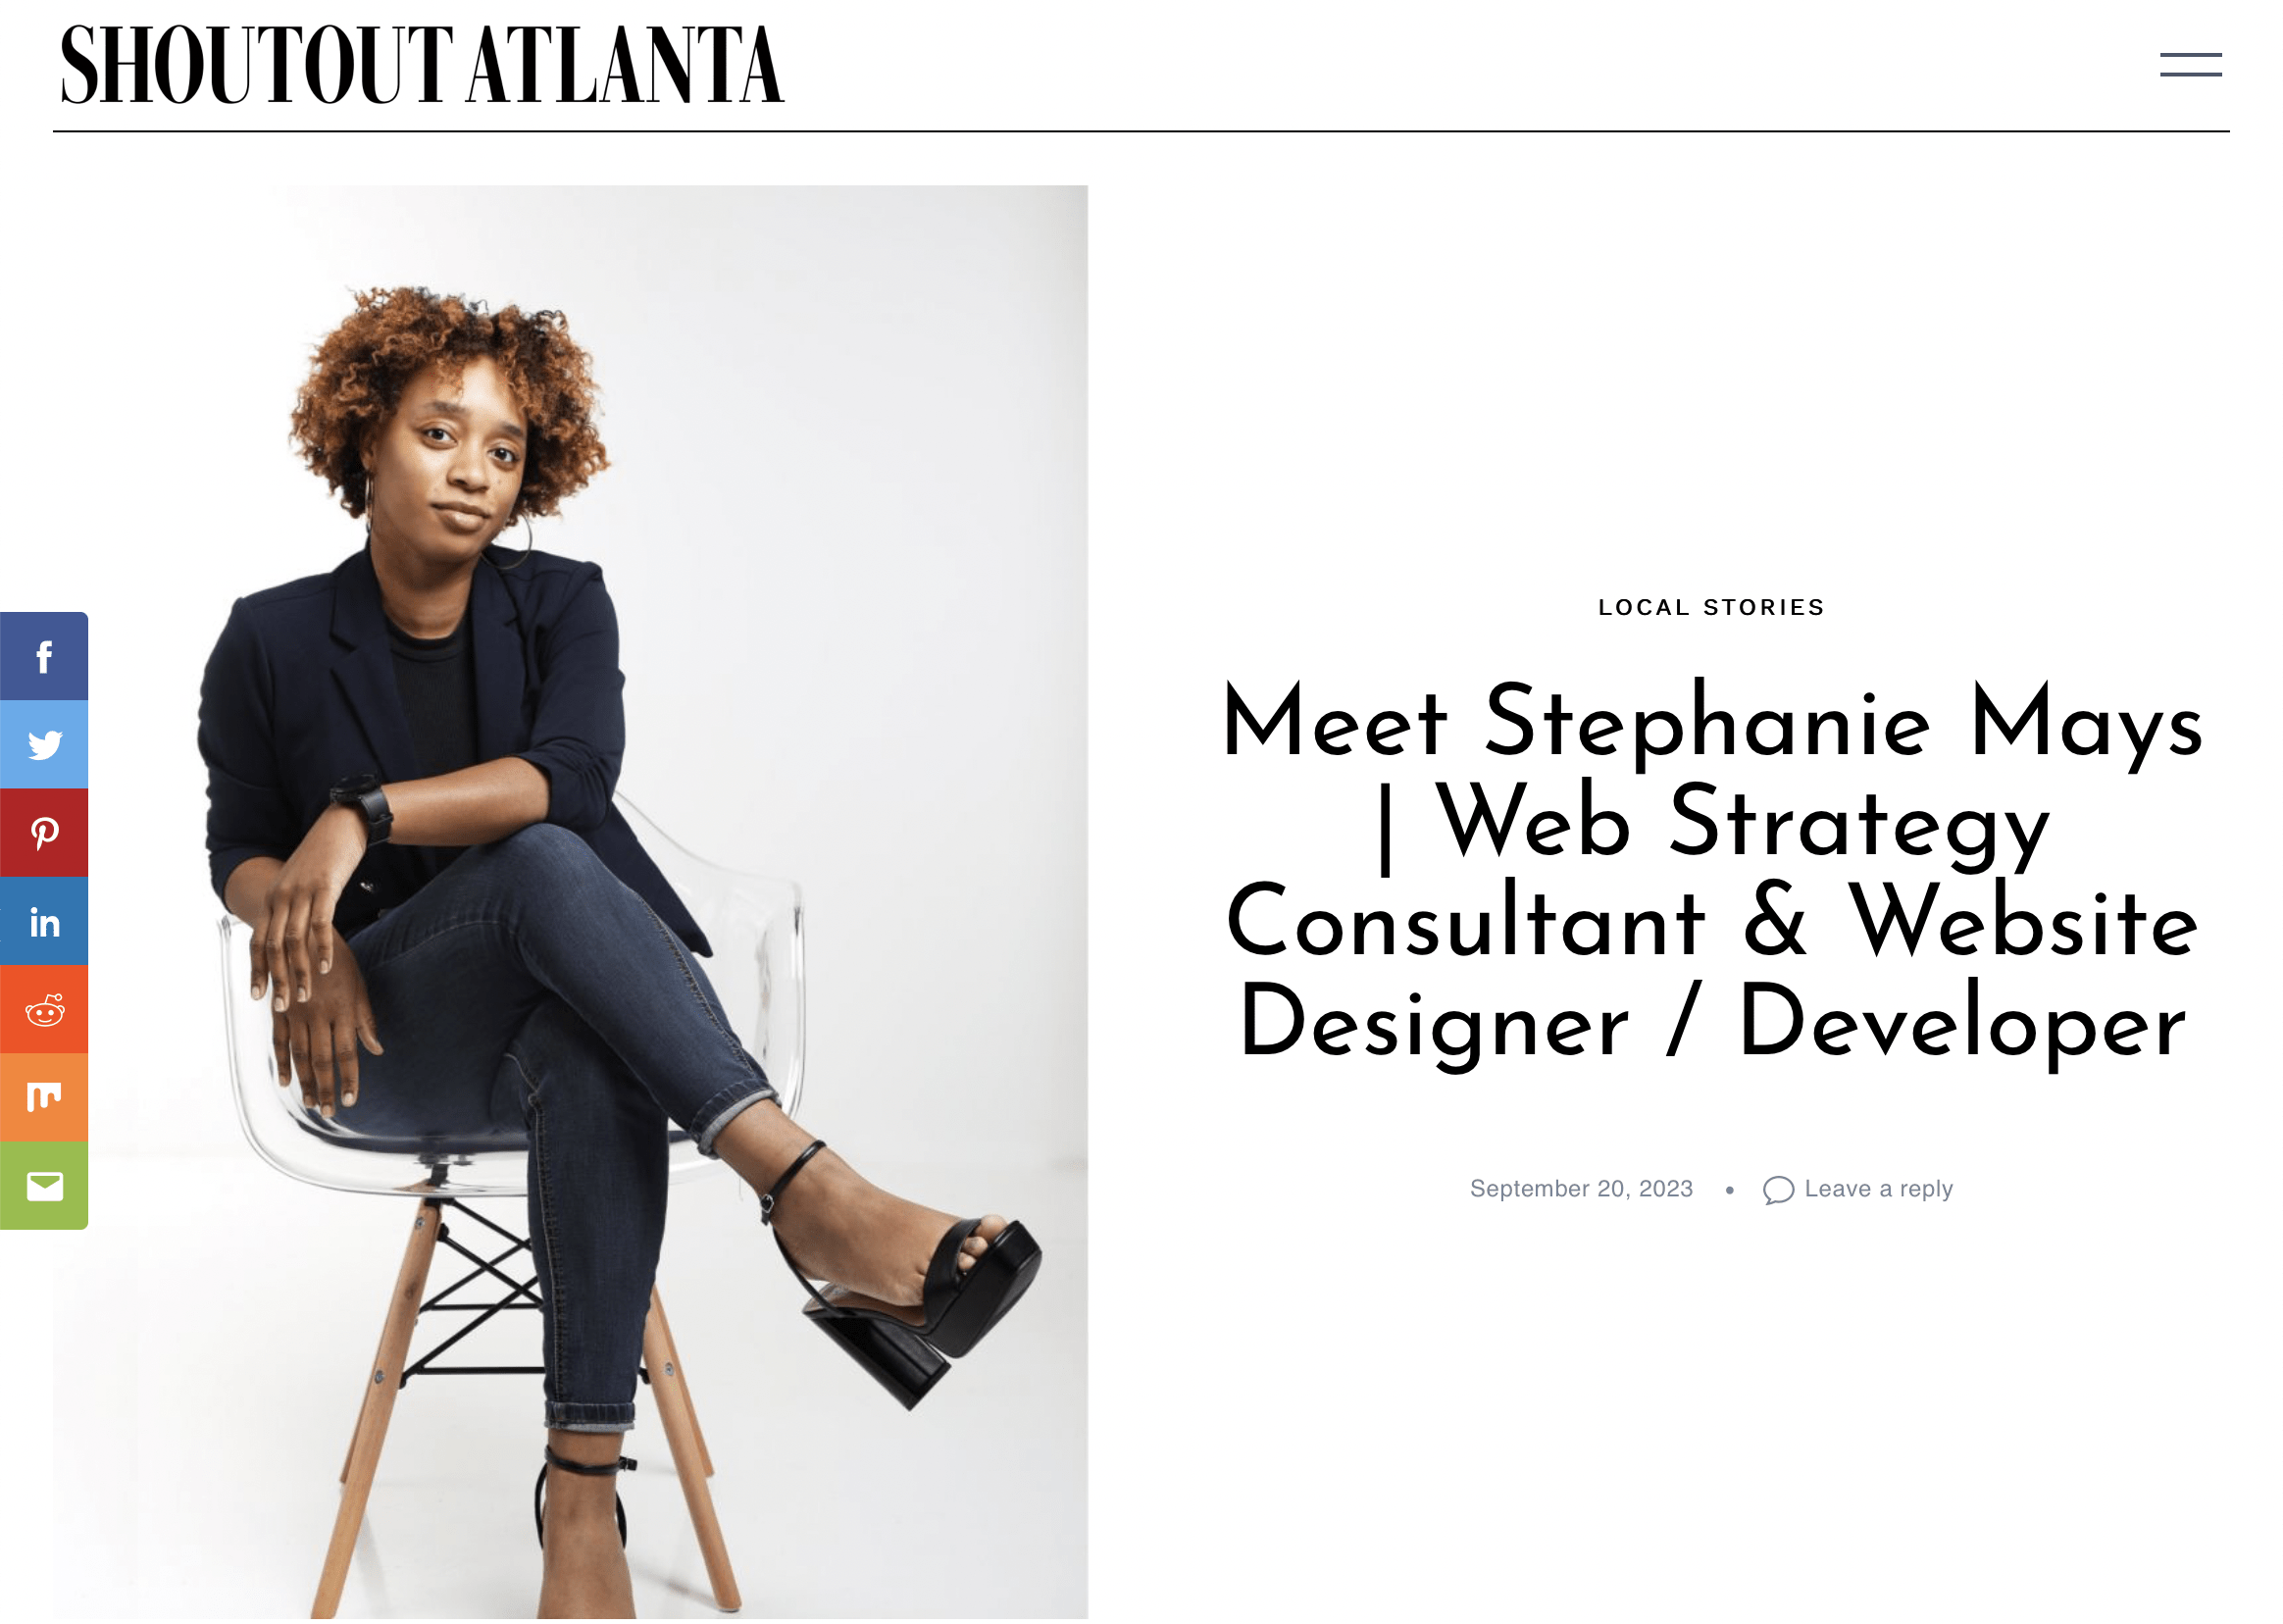 Shoutout Atlanta interview with S.Mays Designs CEO Stephanie Mays